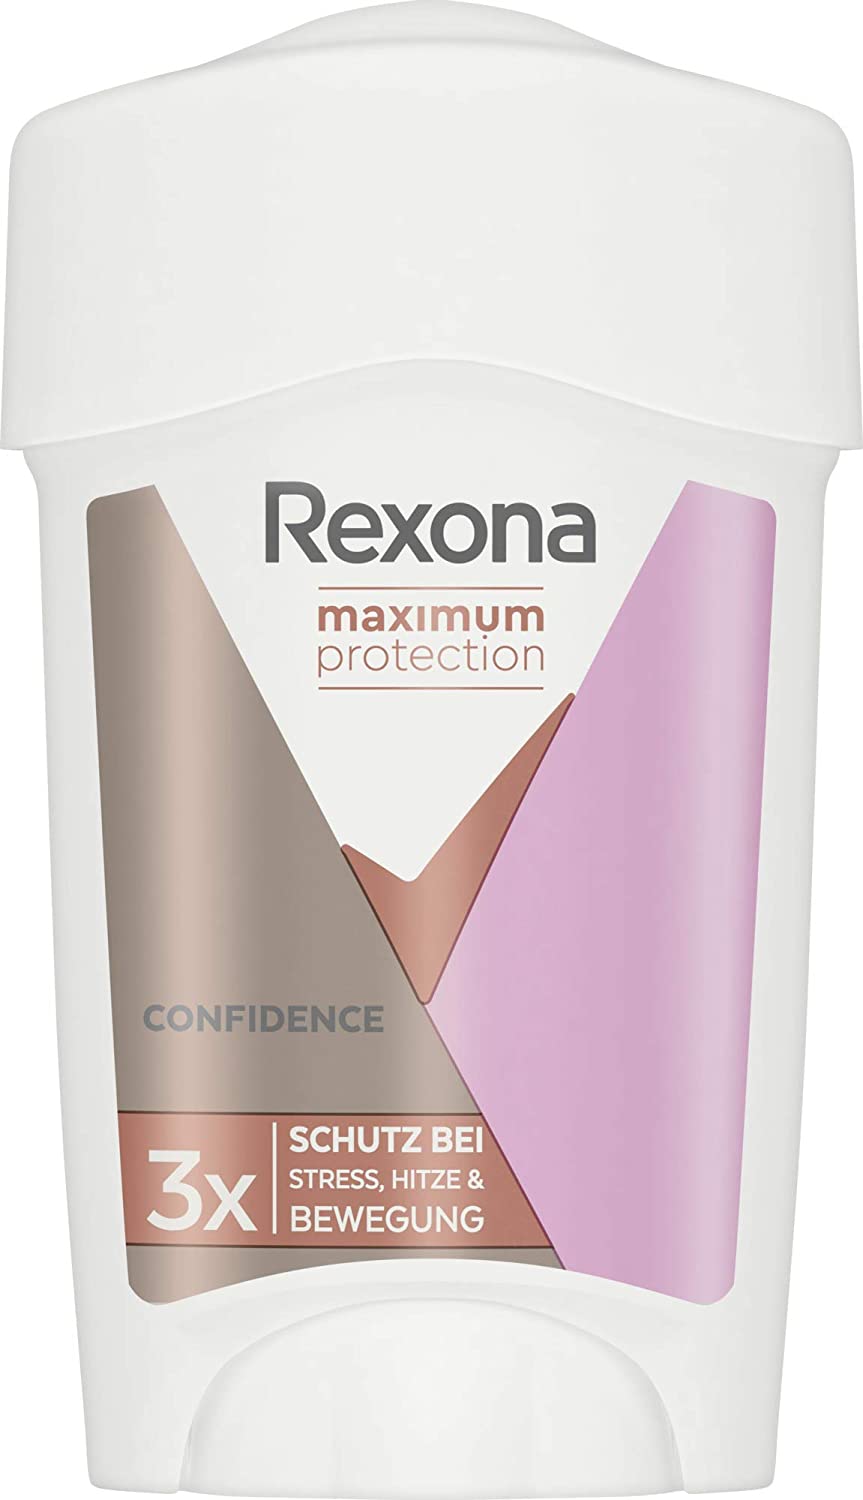 REXONA Maximum Protection Antiperspirant Cream Stick Confidence Deodorant with 48 Hour Protection for Long Lasting Freshness 45 ml Pack of 1